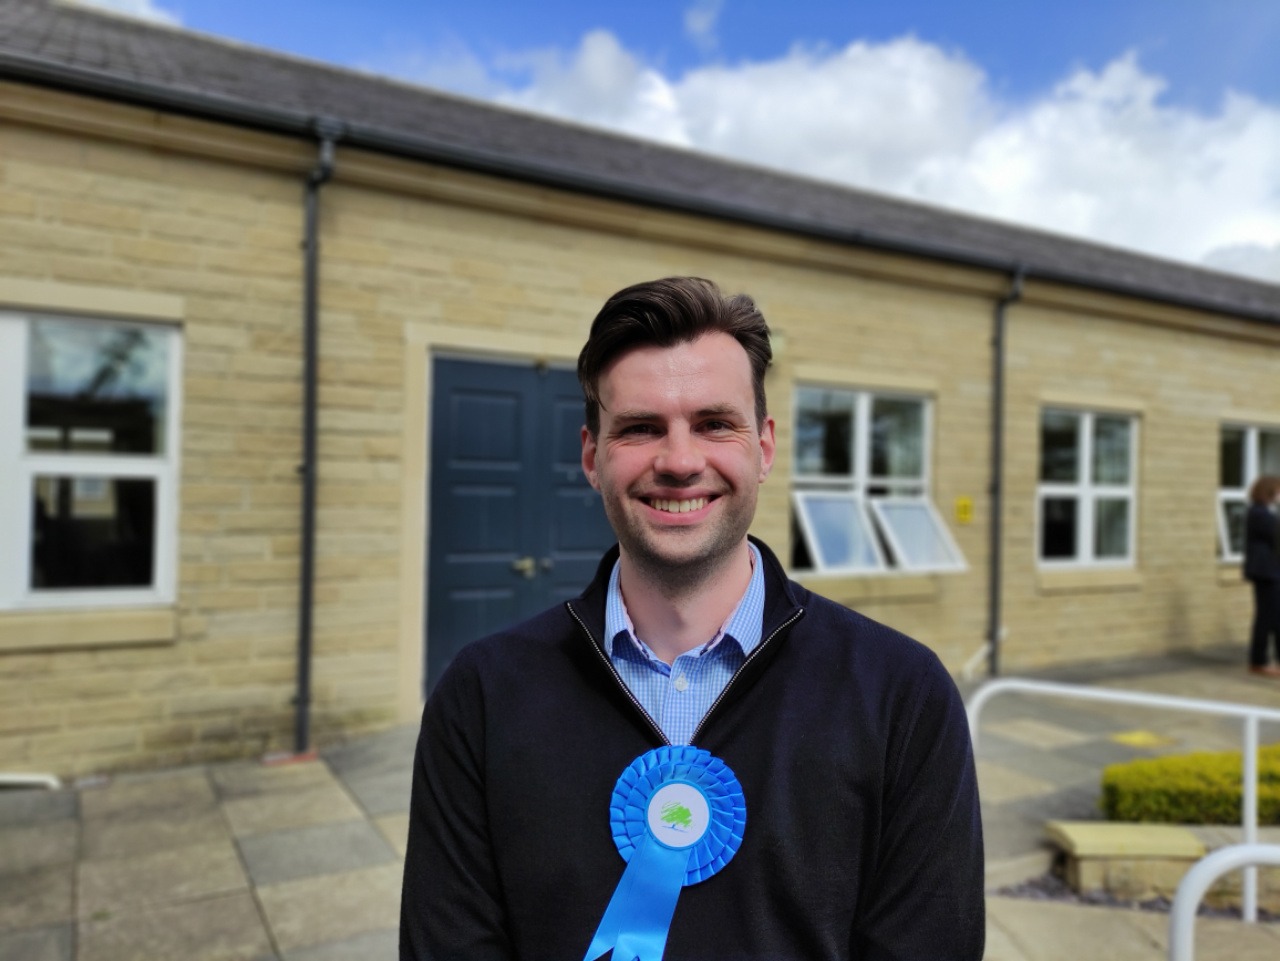 Matt Scott has won the Bilton and Nidd Gorge by-election for the Conservative Party